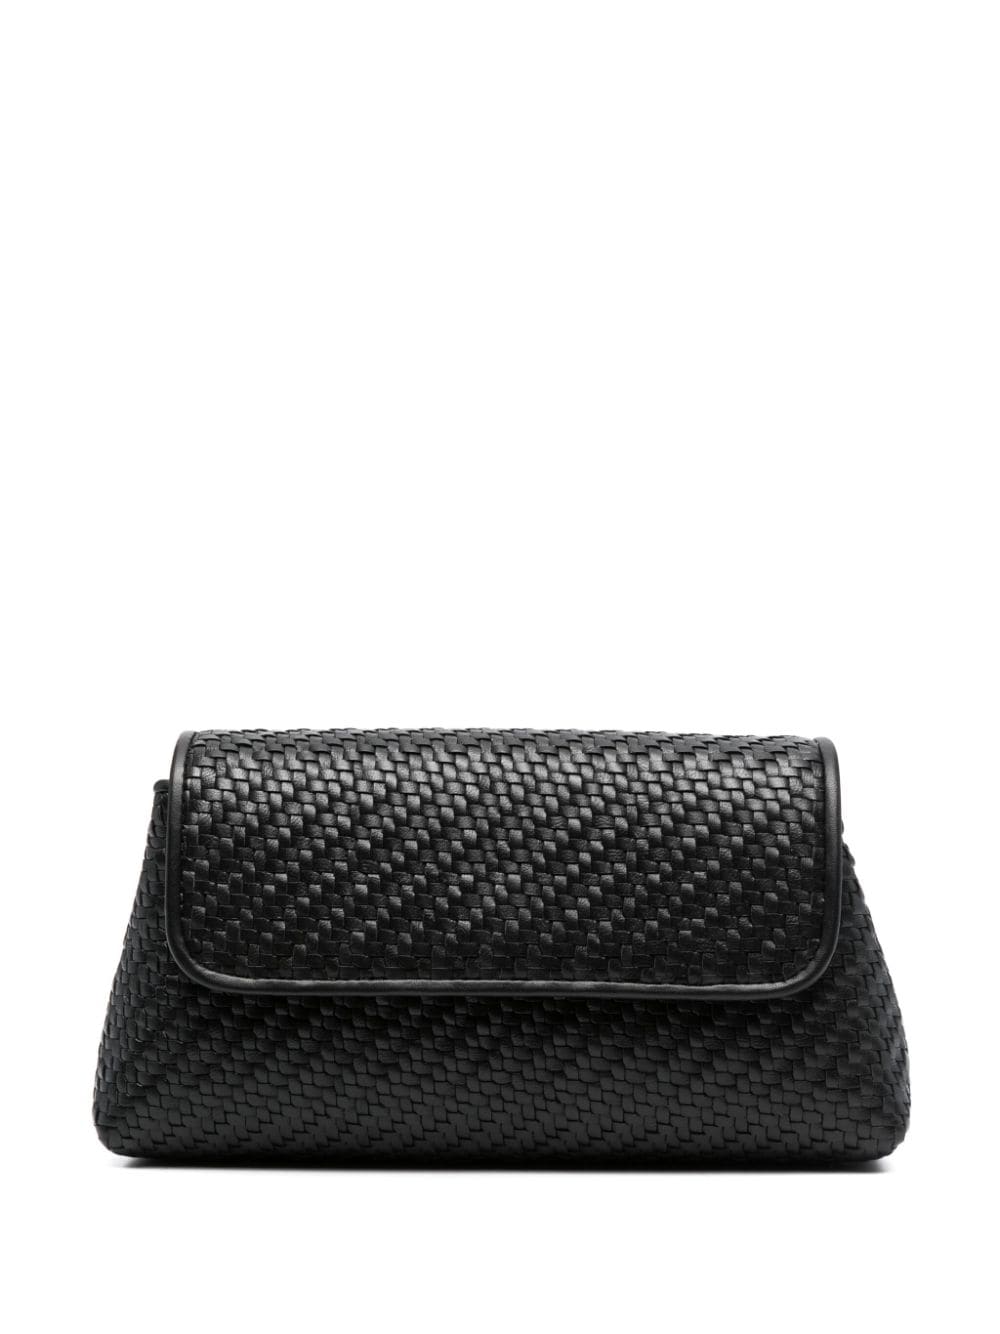 Aspinal Of London diagonal-weave leather clutch bag - Black von Aspinal Of London